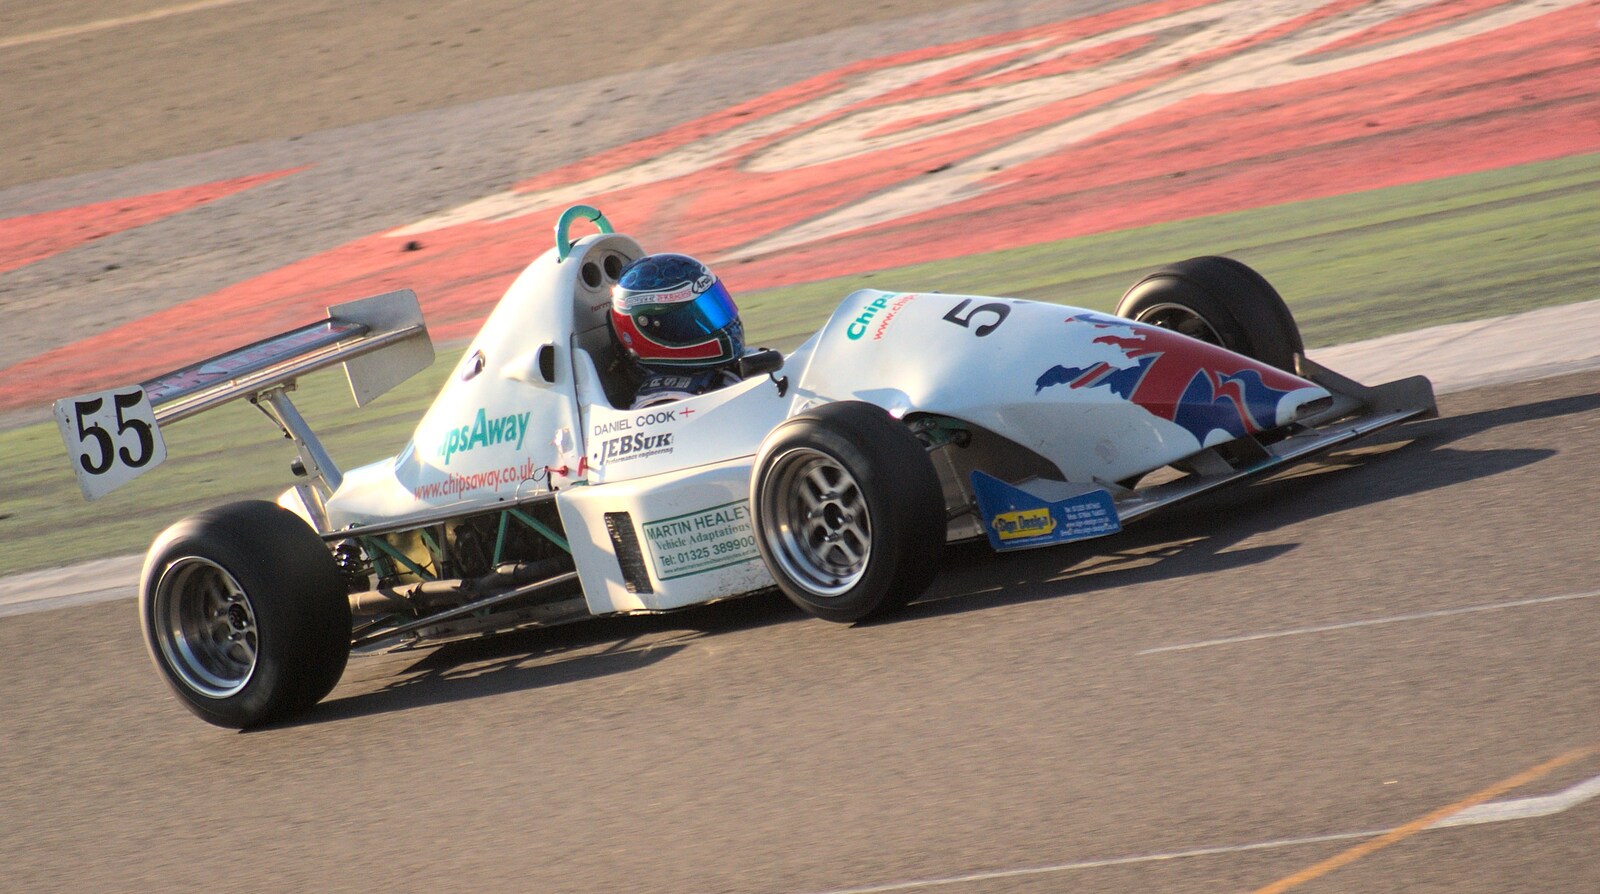 Daniel Cook races around from TouchType at Silverstone, Northamptonshire - 22nd October 2011